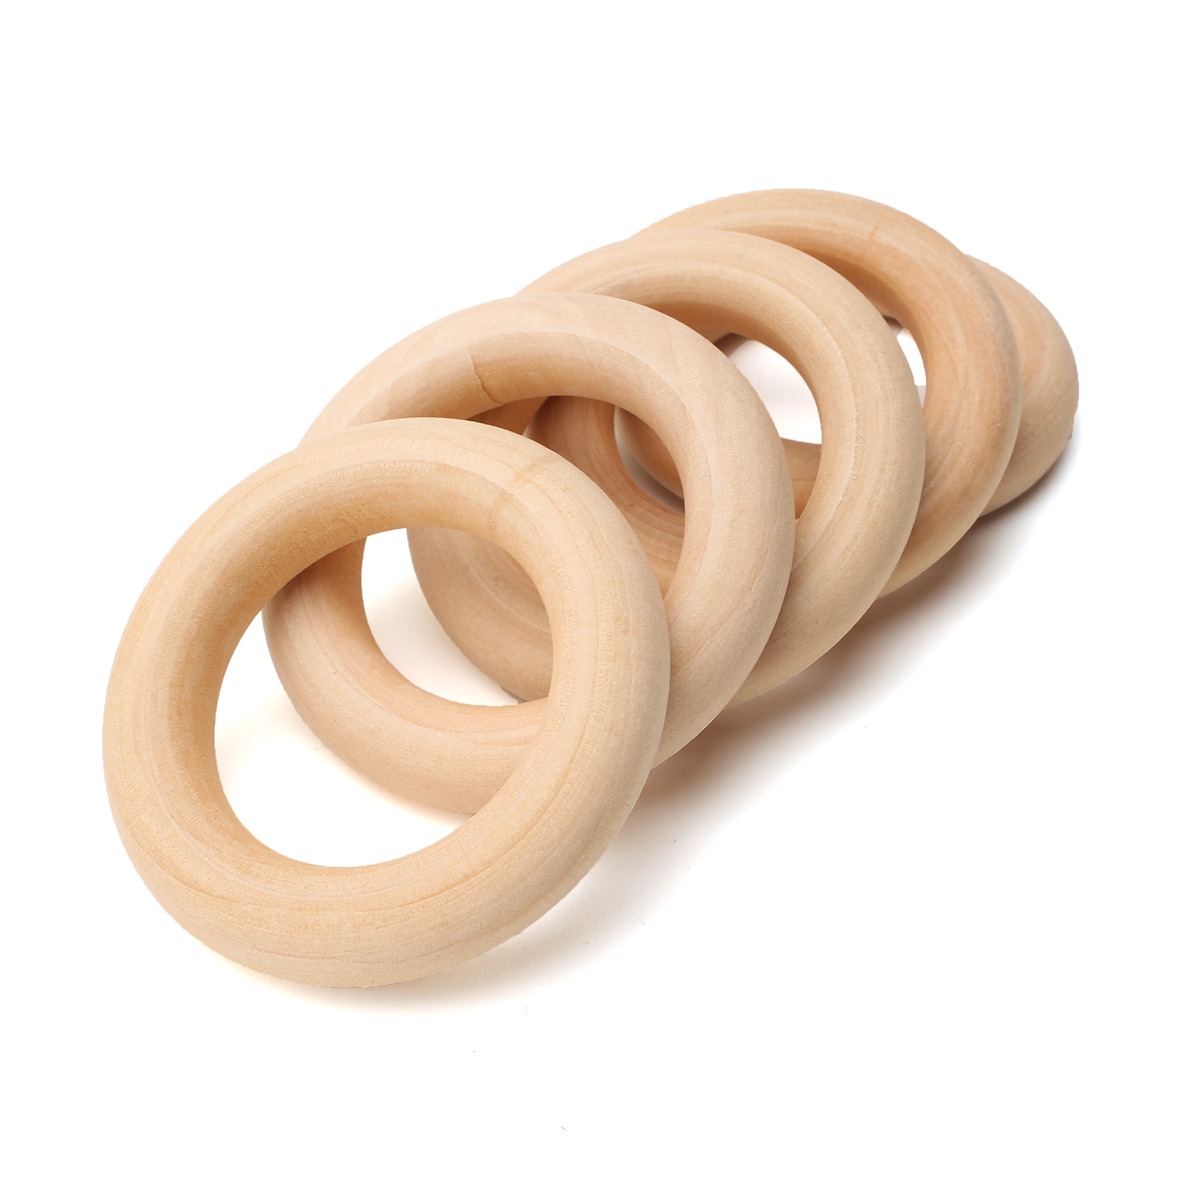 

20Pcs Natural Wooden Rings Unfinished Ring 55mm for Craft Kids